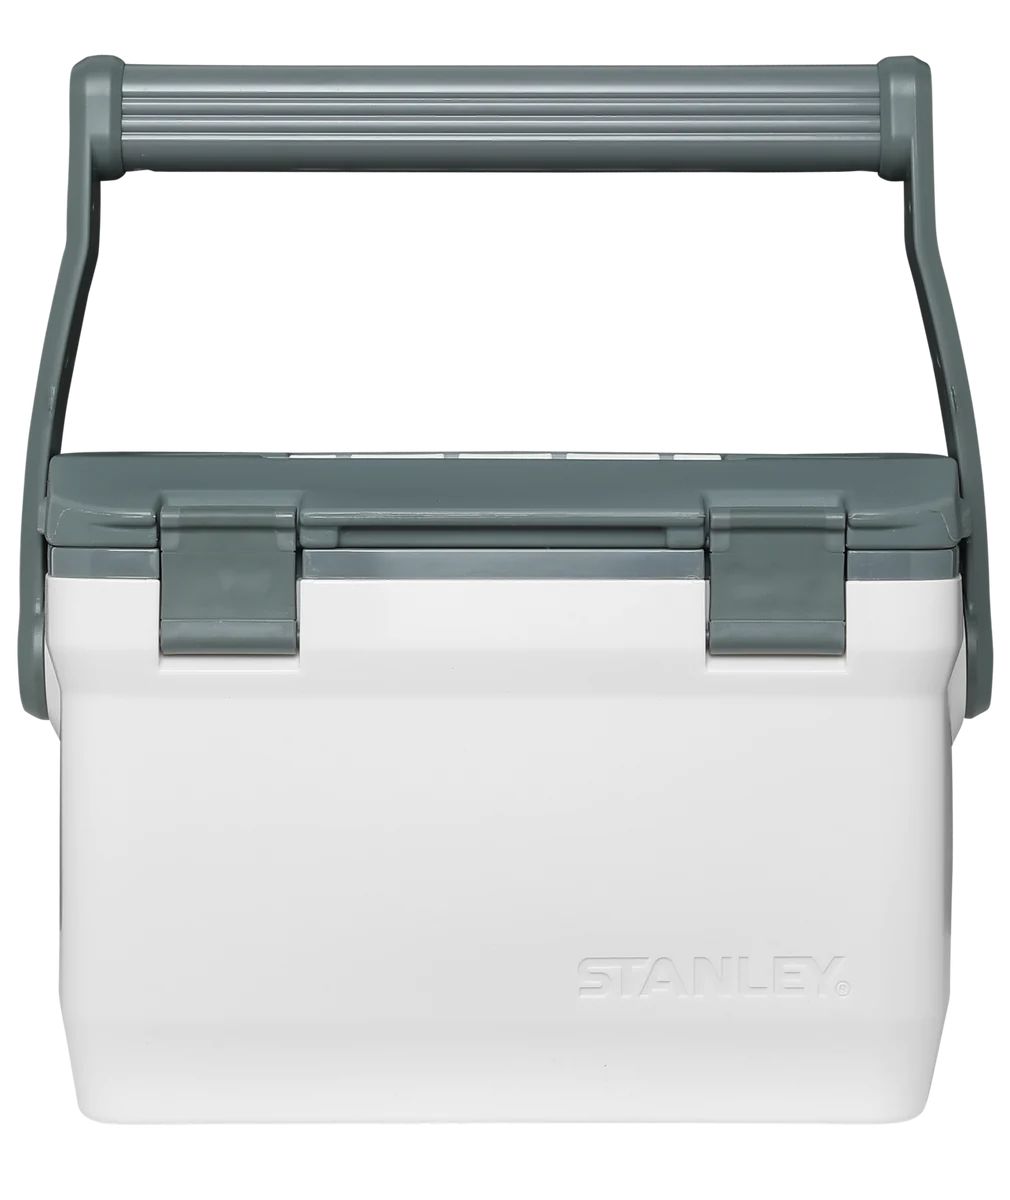 Adventure Easy Carry Outdoor Cooler | 16 QT | Stanley PMI US